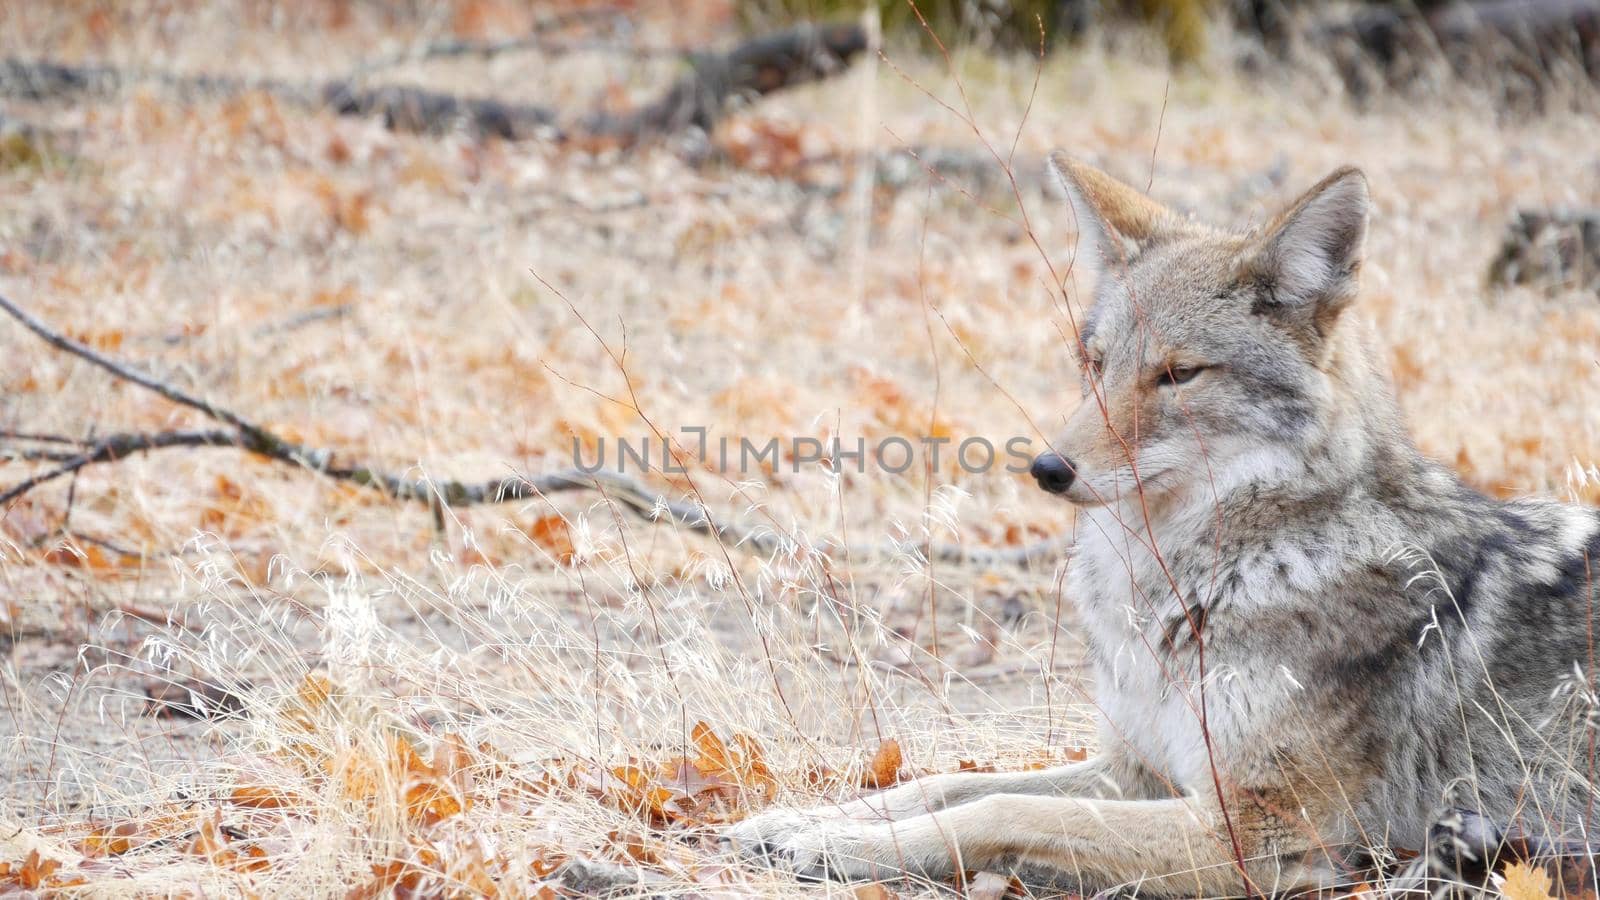 Wild furry wolf, gray coyote or grey coywolf, autumn forest glade, Yosemite national park wildlife, California fauna, USA. Portrait of hybrid dog like animal lying down on grass. Face, head and eyes.